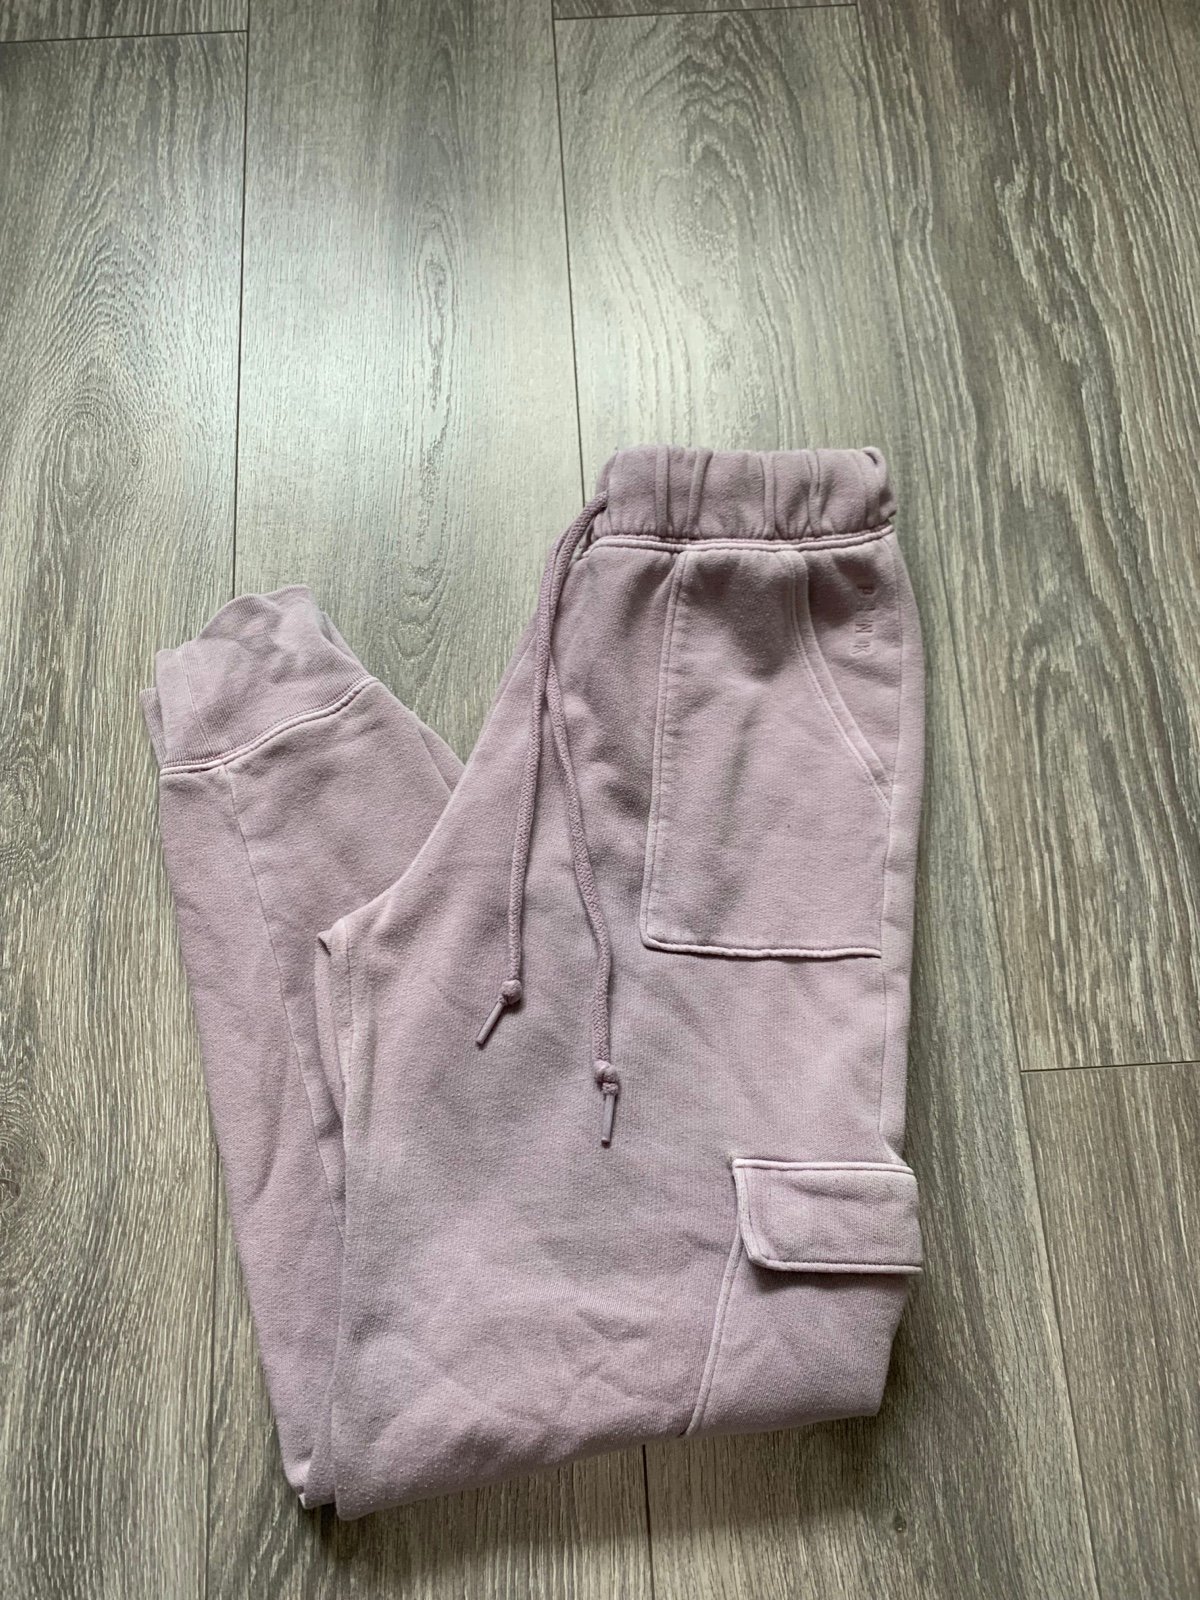 high discount PINK Victoria’s Secret Women’s Sweatpants Joggers  size XS lyWtgLr4v all for you